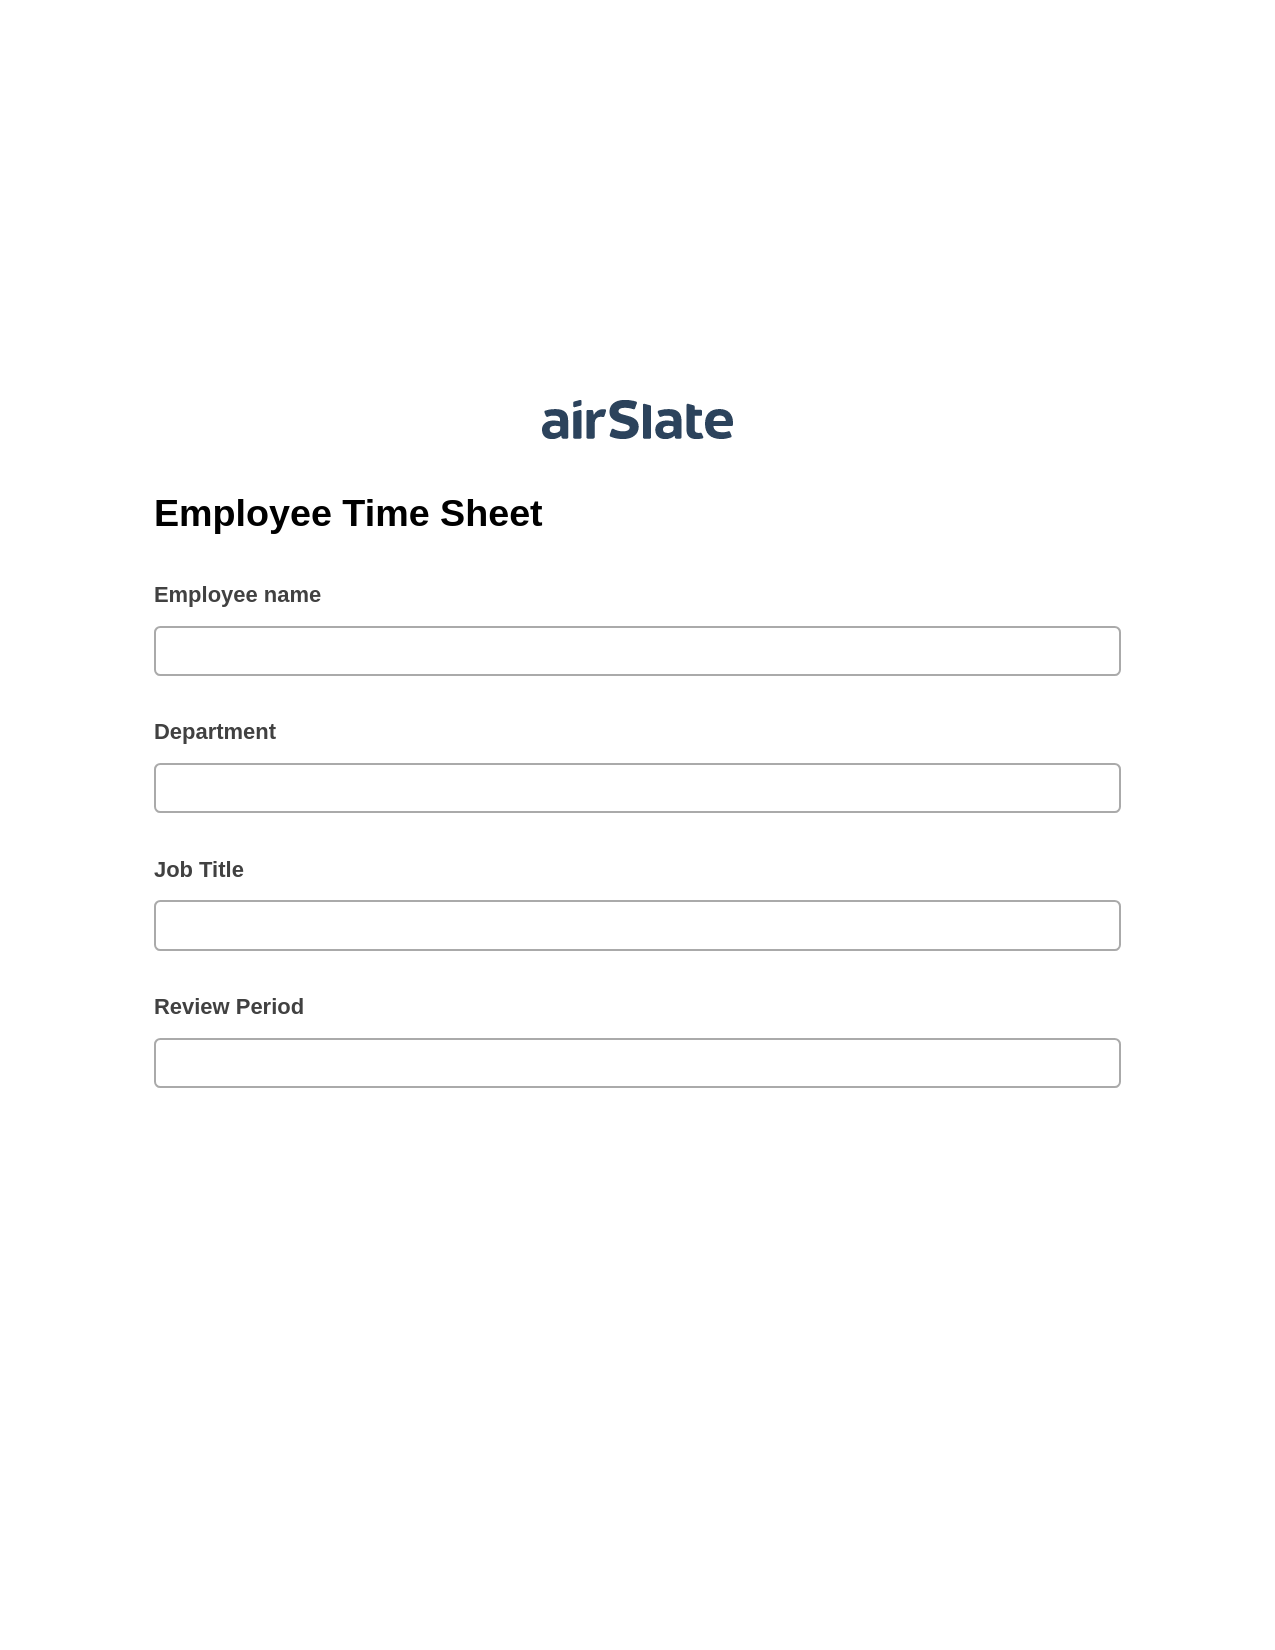 Multirole Employee Time Sheet Pre-fill from Salesforce Records Bot, Update MS Dynamics 365 Record Bot, Export to NetSuite Bot